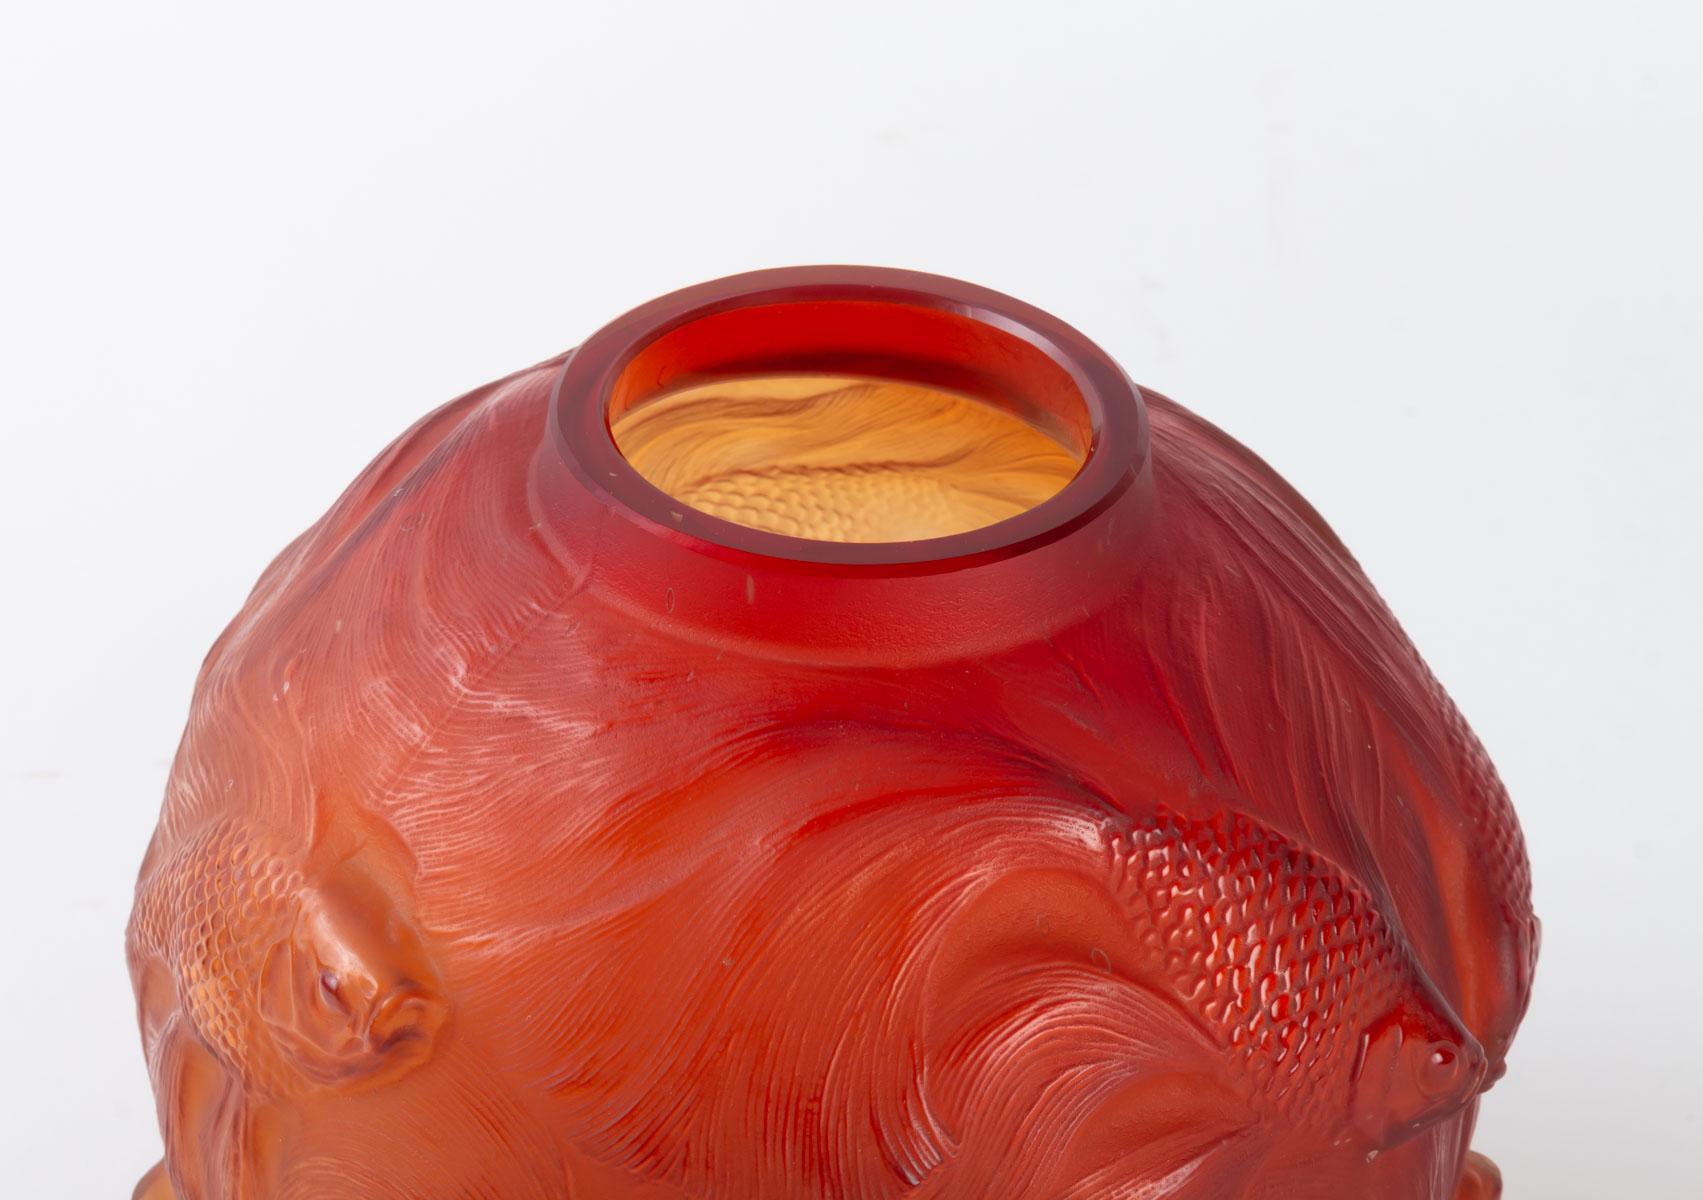 French 1924 Rene Lalique Formose Vase in Double Cased Red Orange Glass, Fishes Design